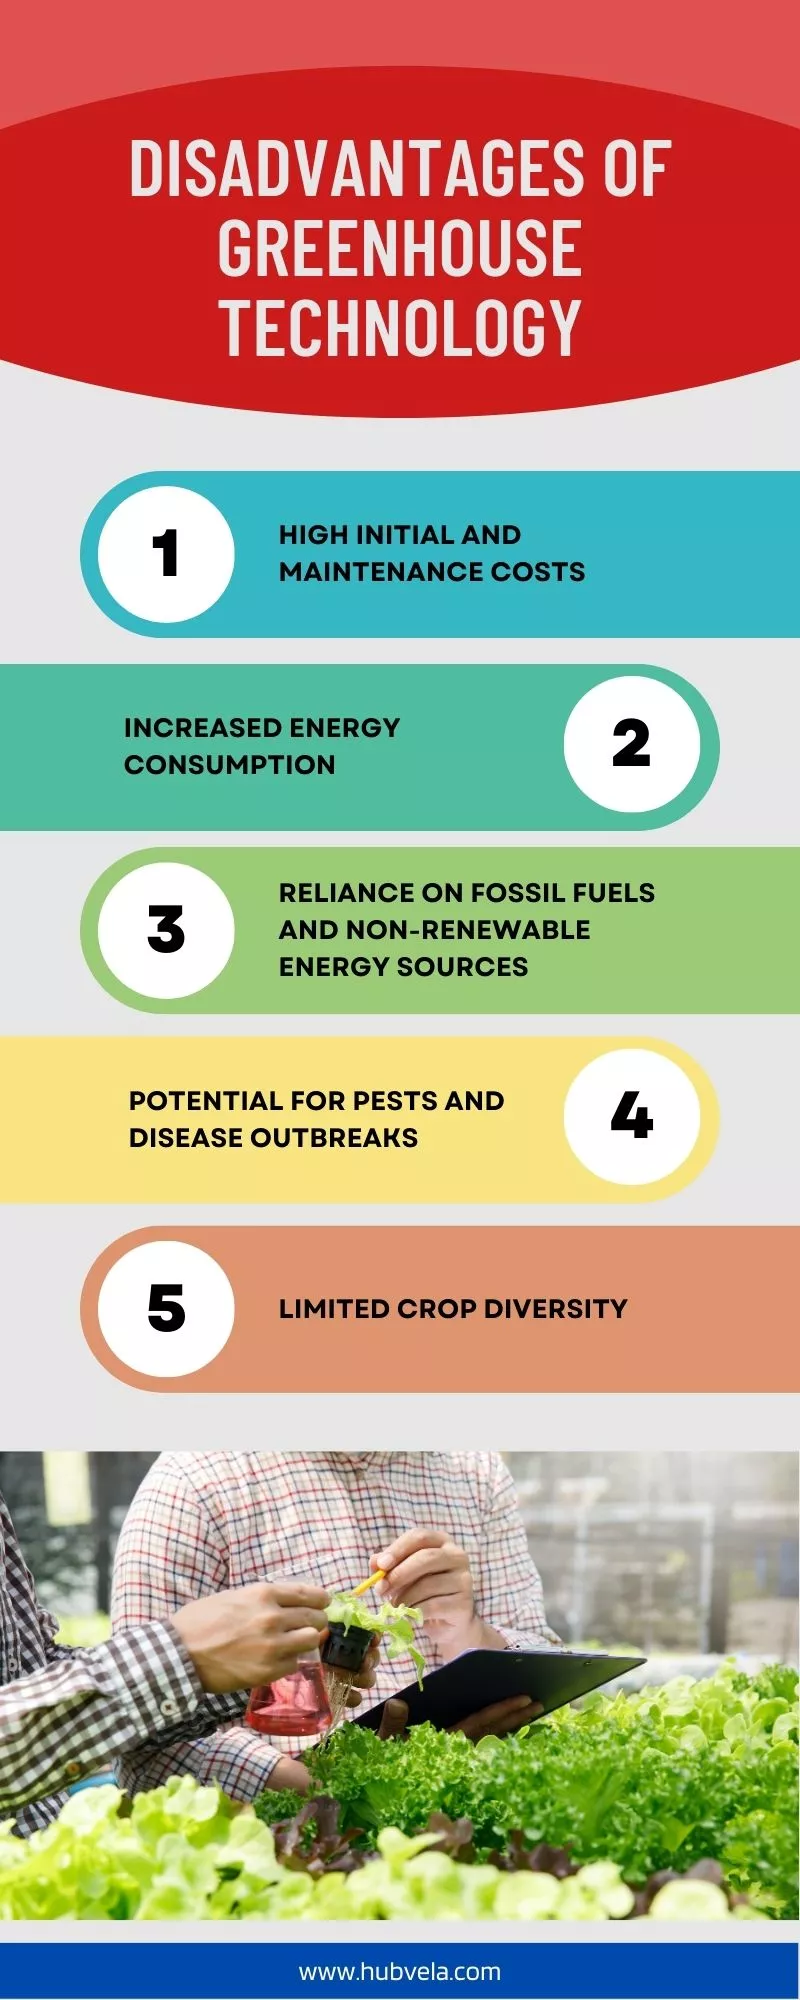 Disadvantages of Greenhouse Technology Infographic